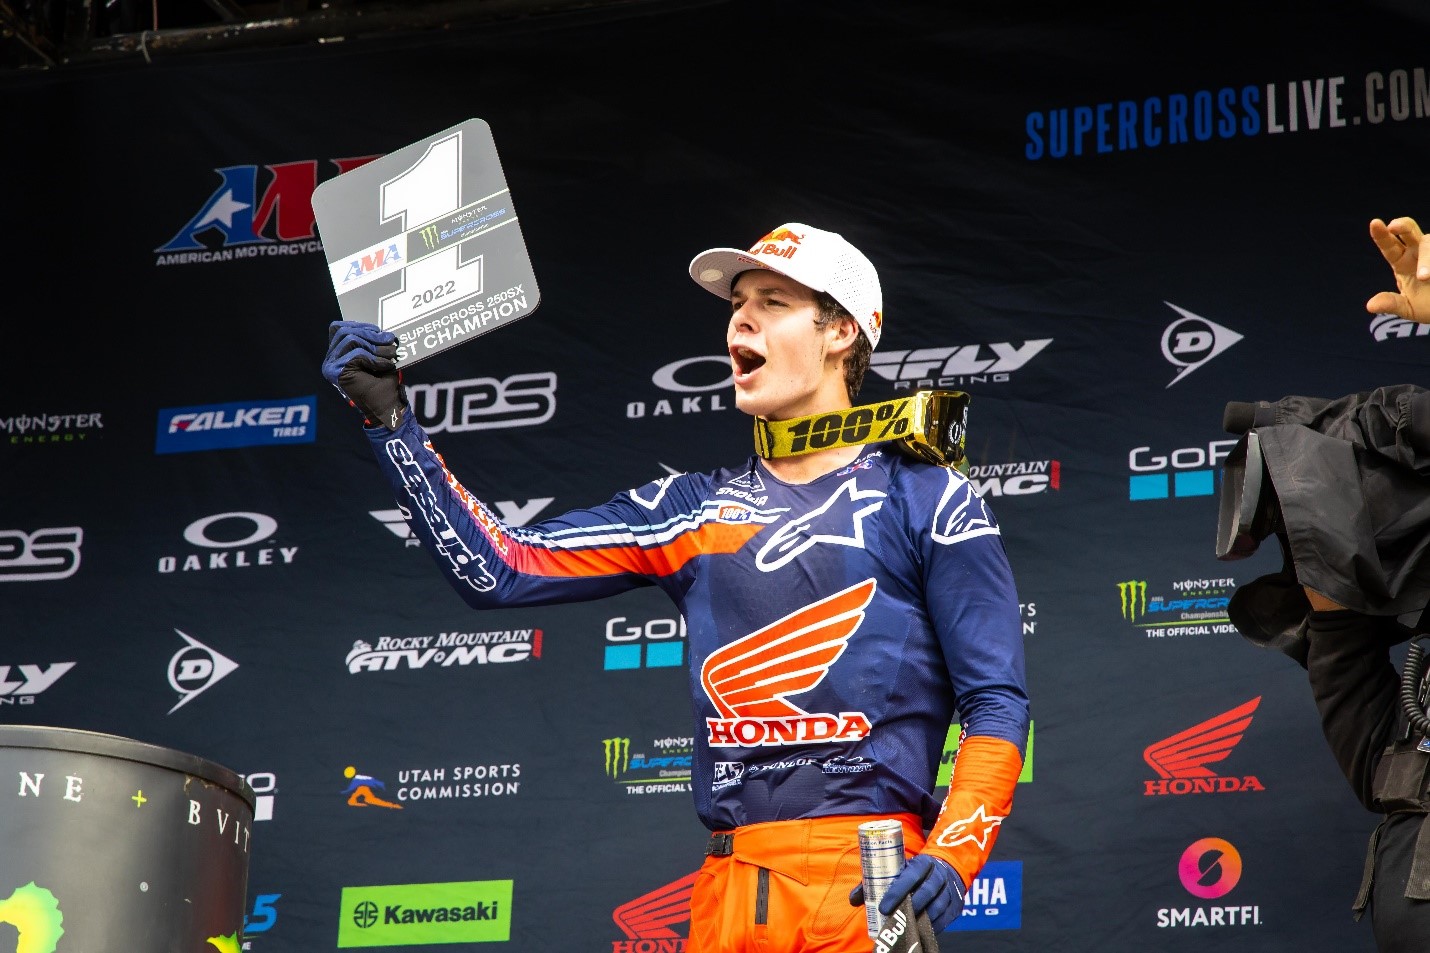 Jett Lawrence celebrating his first Monster Energy AMA Supercross 250SX Class Championship at Gillette Stadium in Foxborough, Mass. Photo Credit: Feld Motor Sports